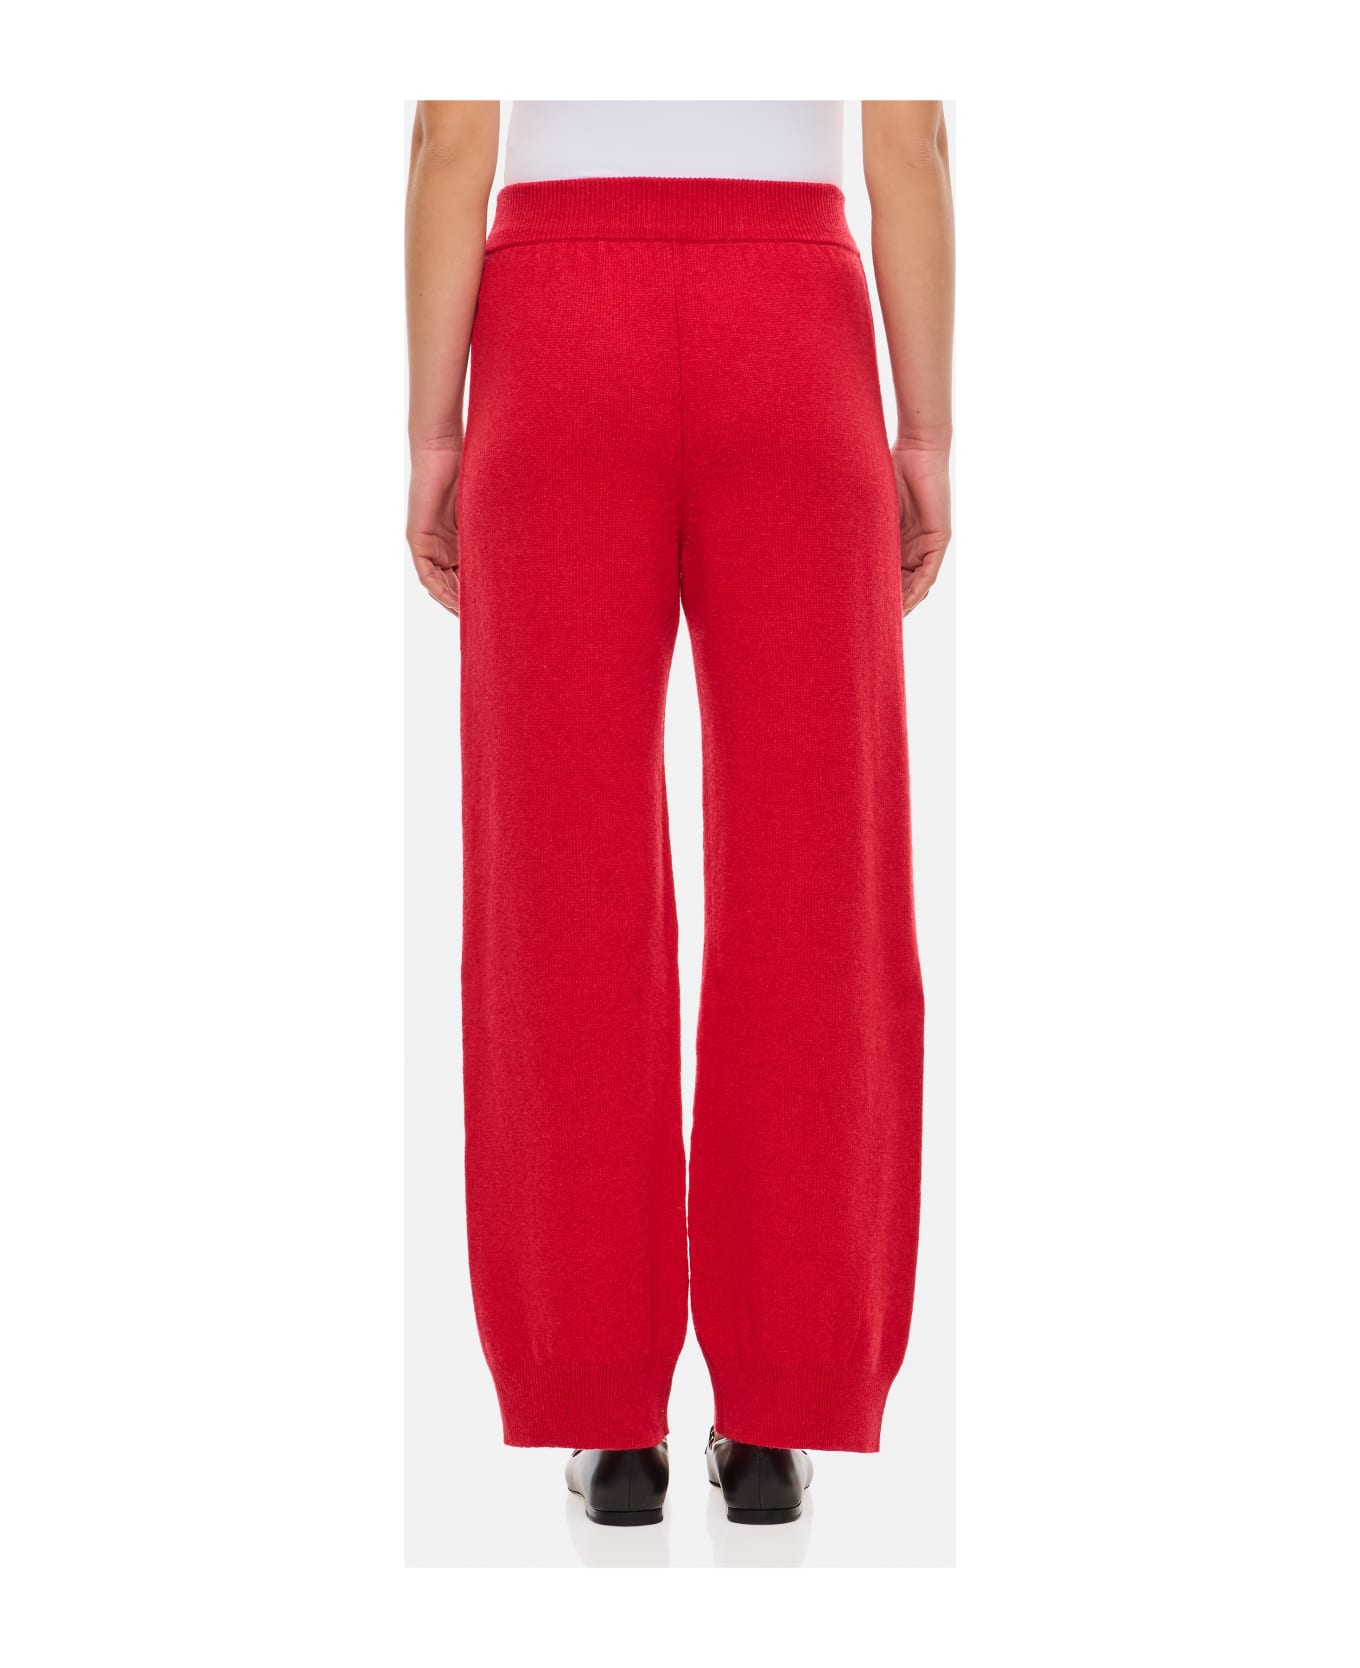 Barrie Cashmere Jogging Pants - Red シャツ